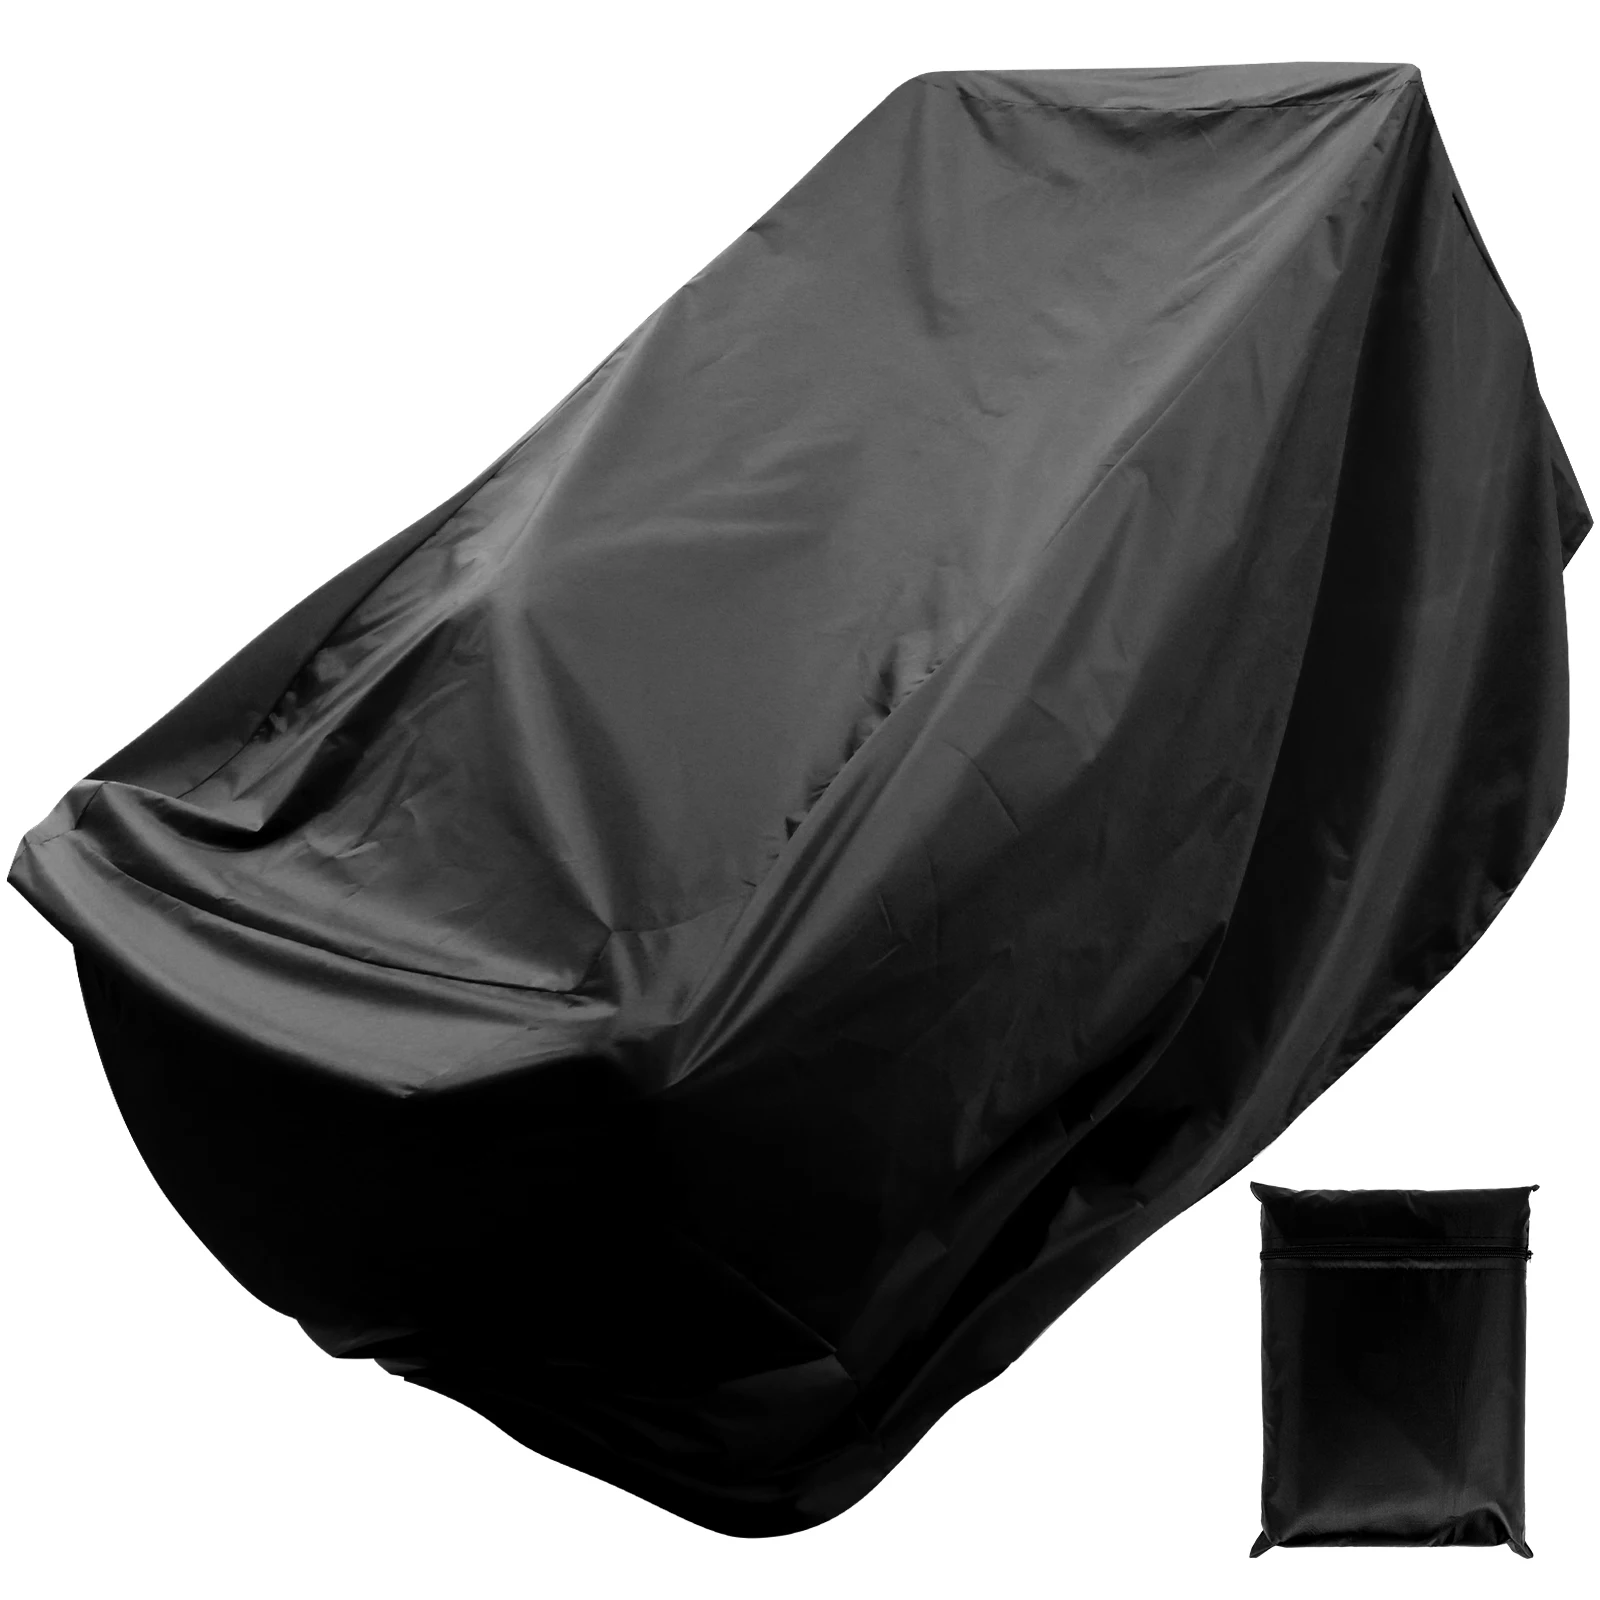 

Snow Thrower Cover 210D Oxford Cloth Snow Blower Cover Waterproof Snow Blower Protector Dustproof Outdoor Snow Blower